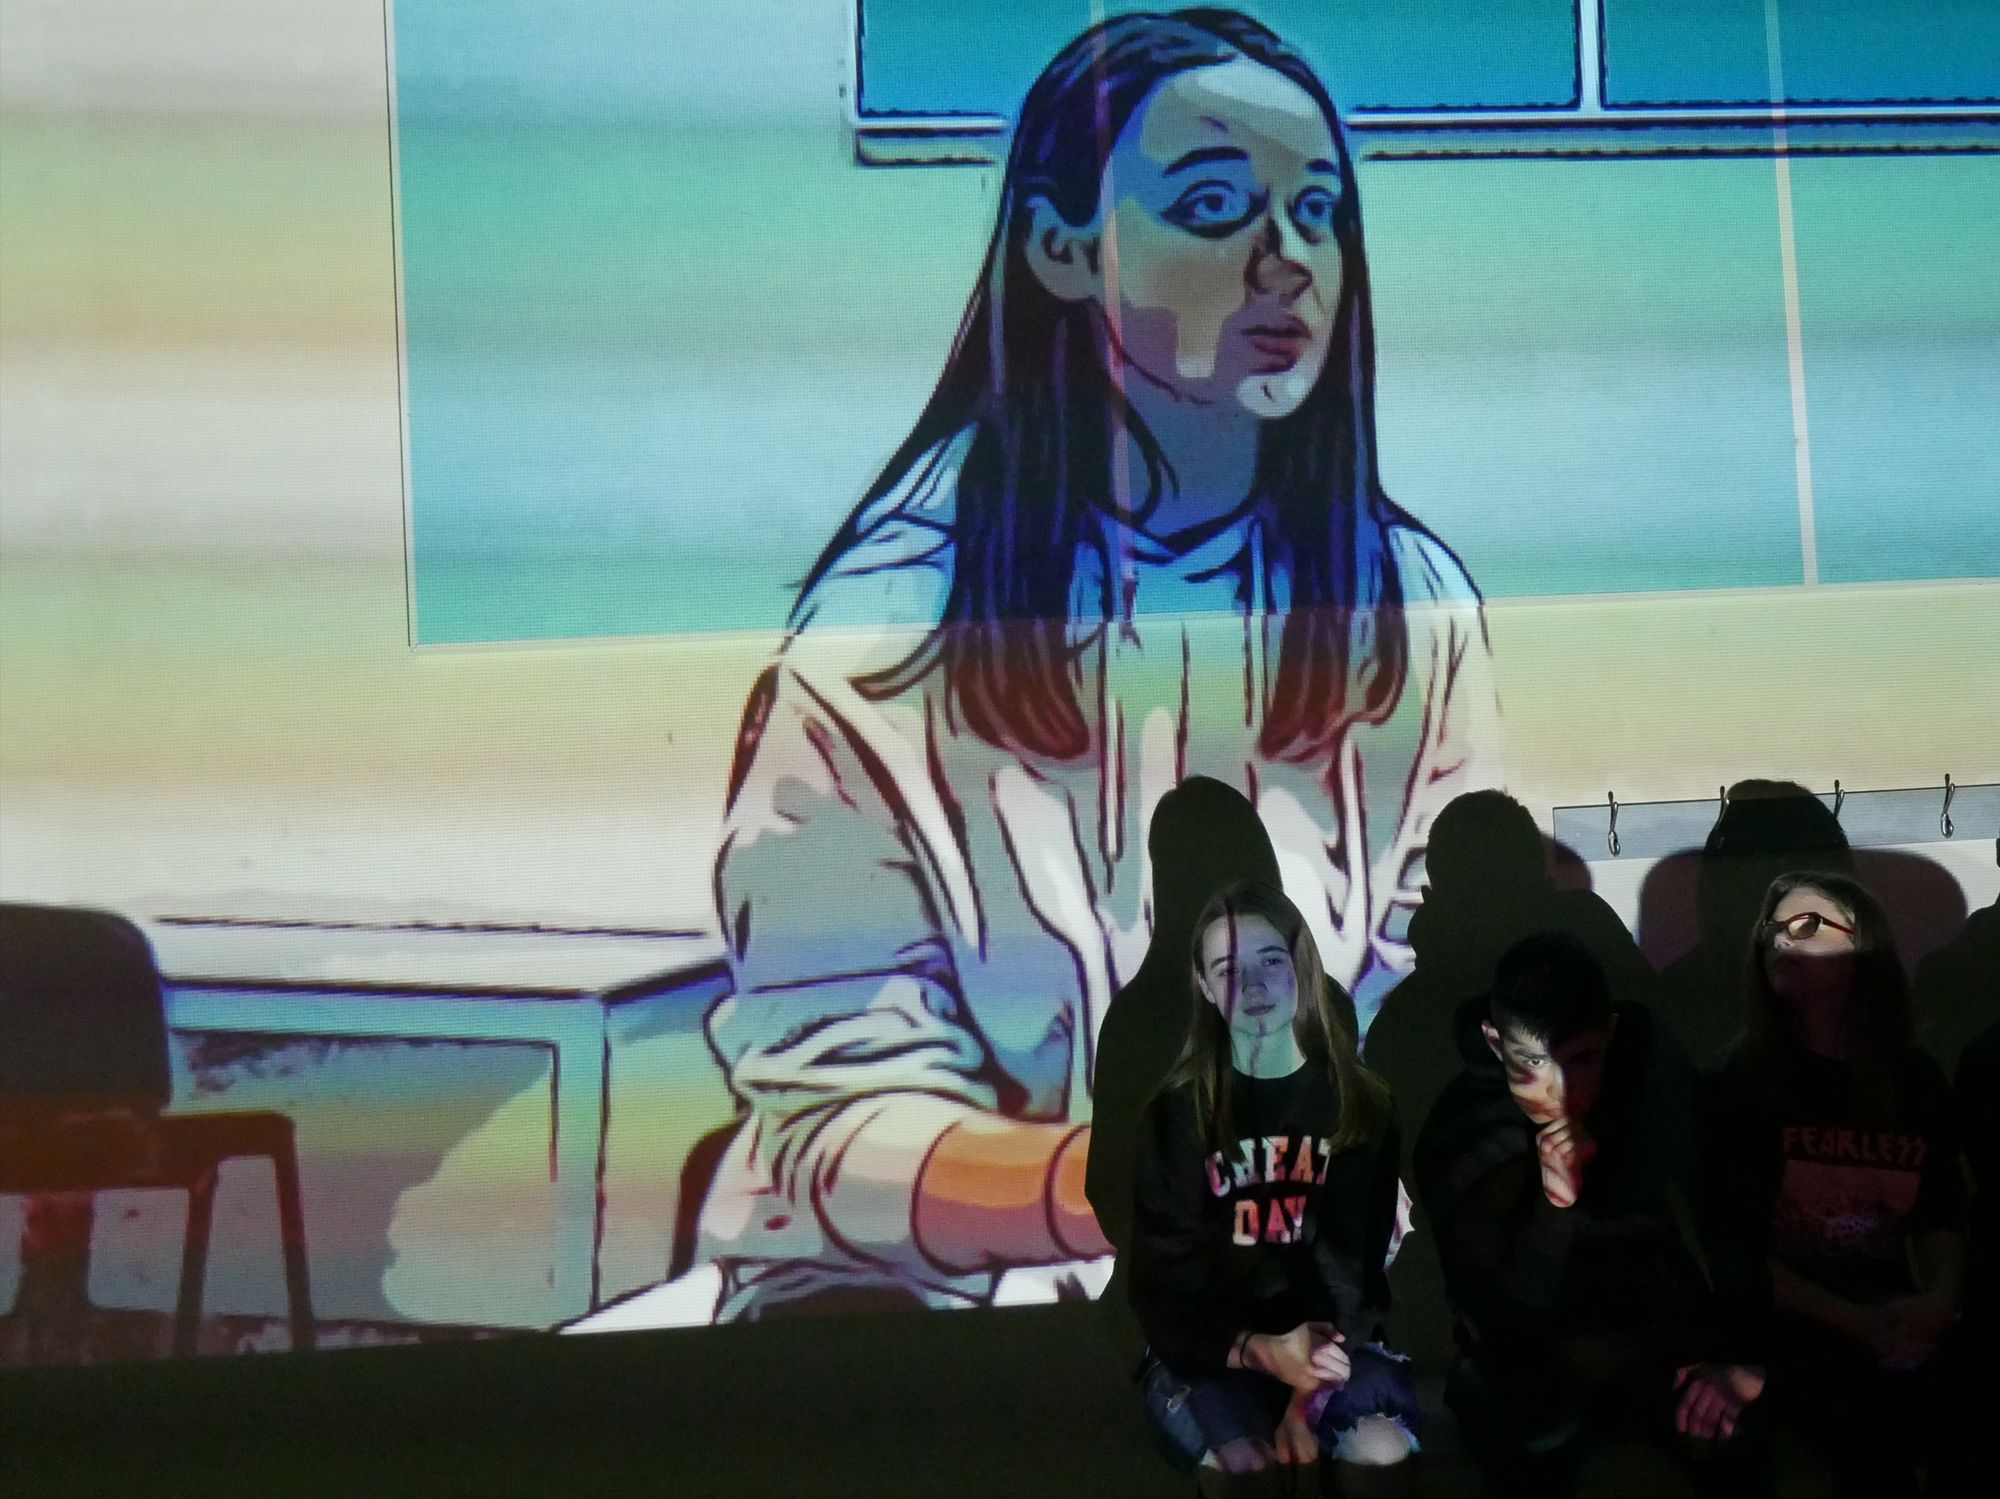 photograph of three students sat against a wall with projection of an image of student in background